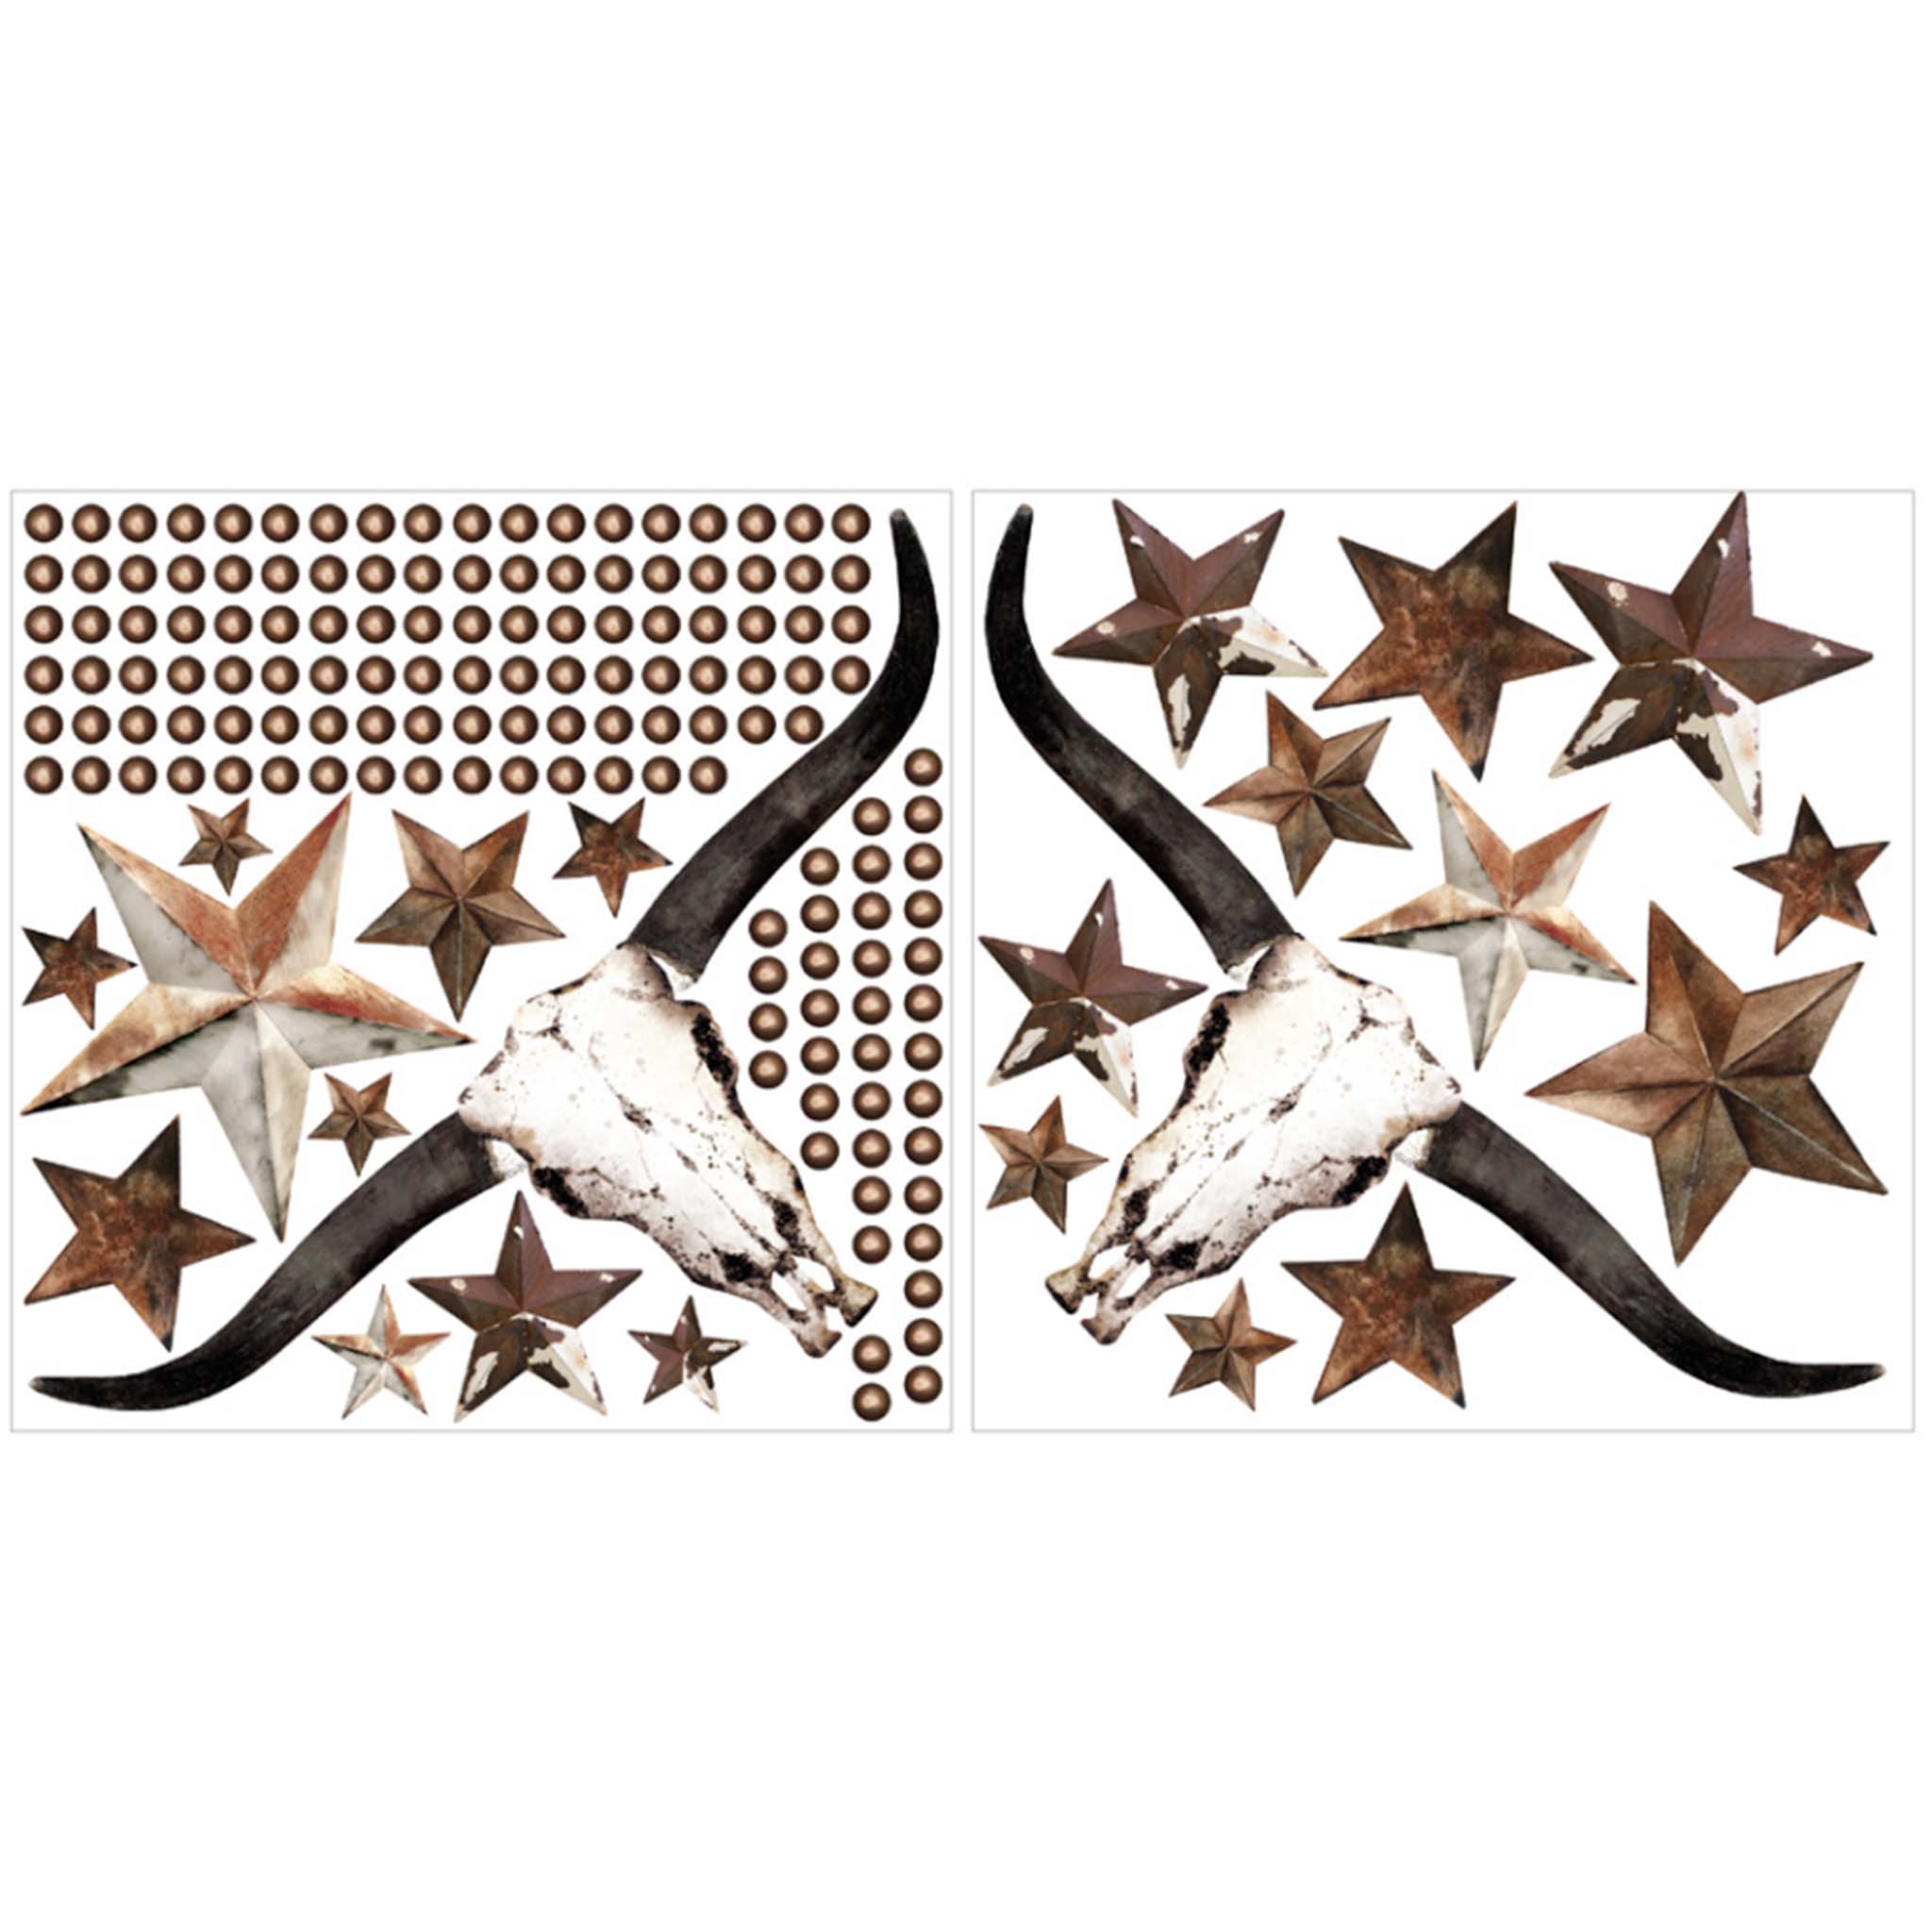 Two sheets of 12"x12" rub-on transfers featuring rustic stars, long horn skulls, and brass stud designs are against a white background.